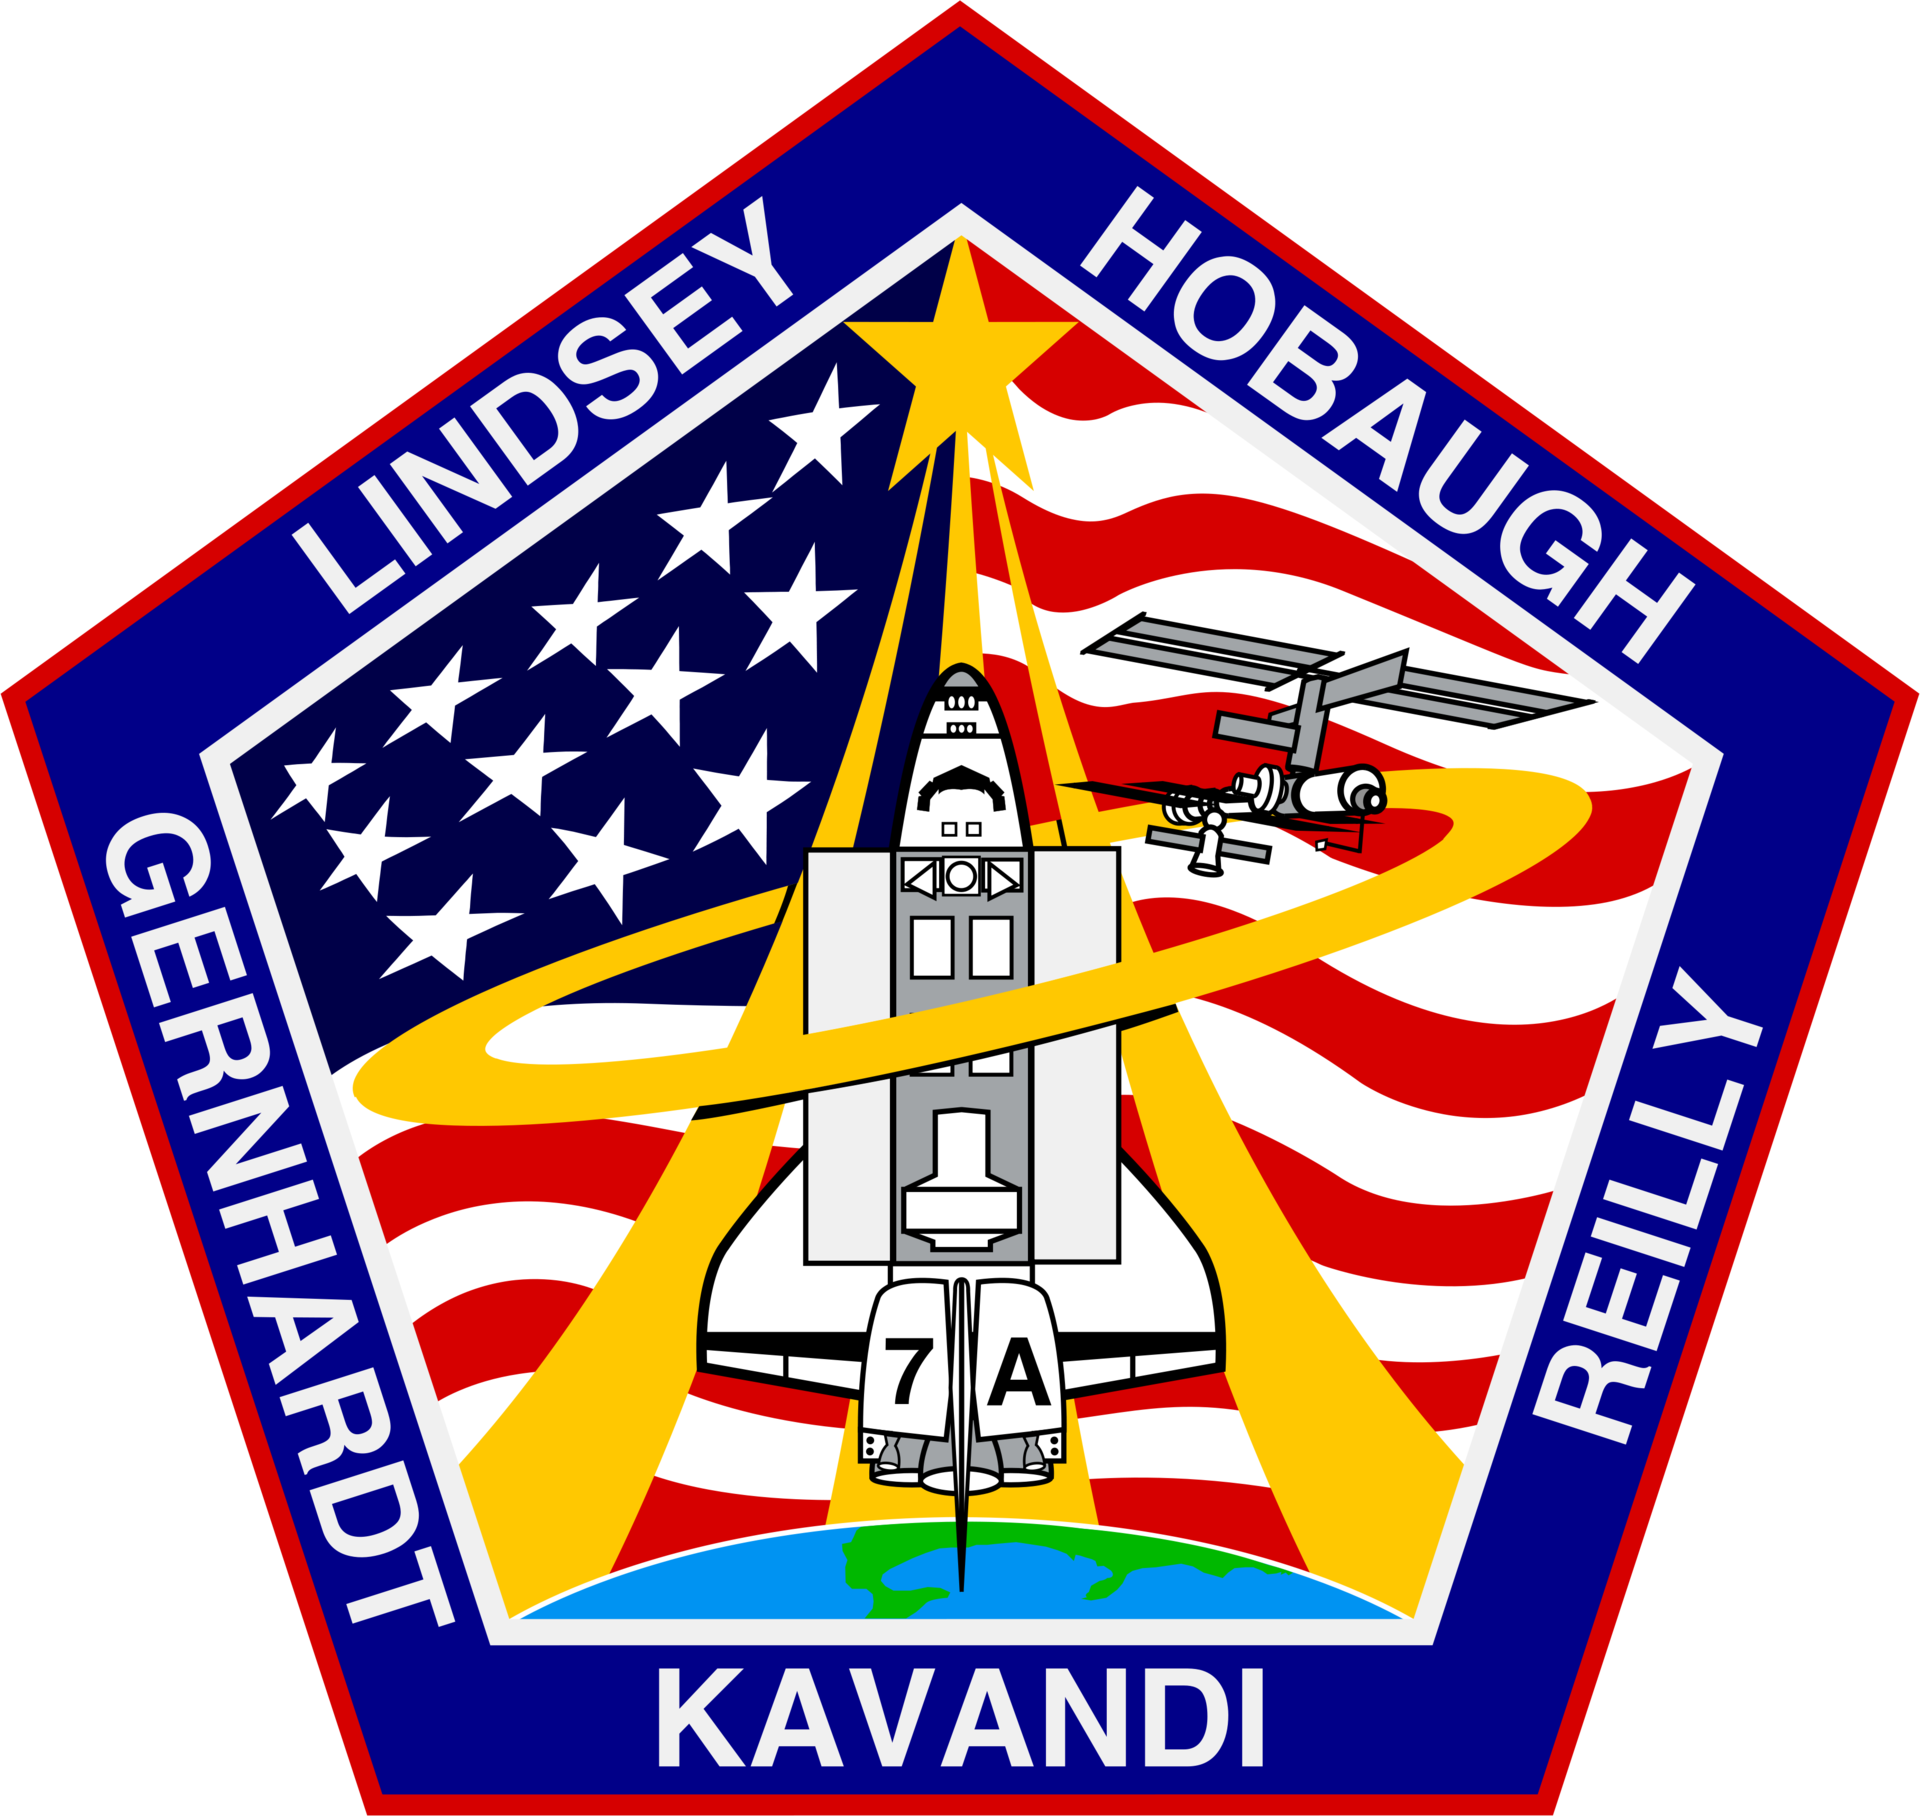 Mission patch for STS-104